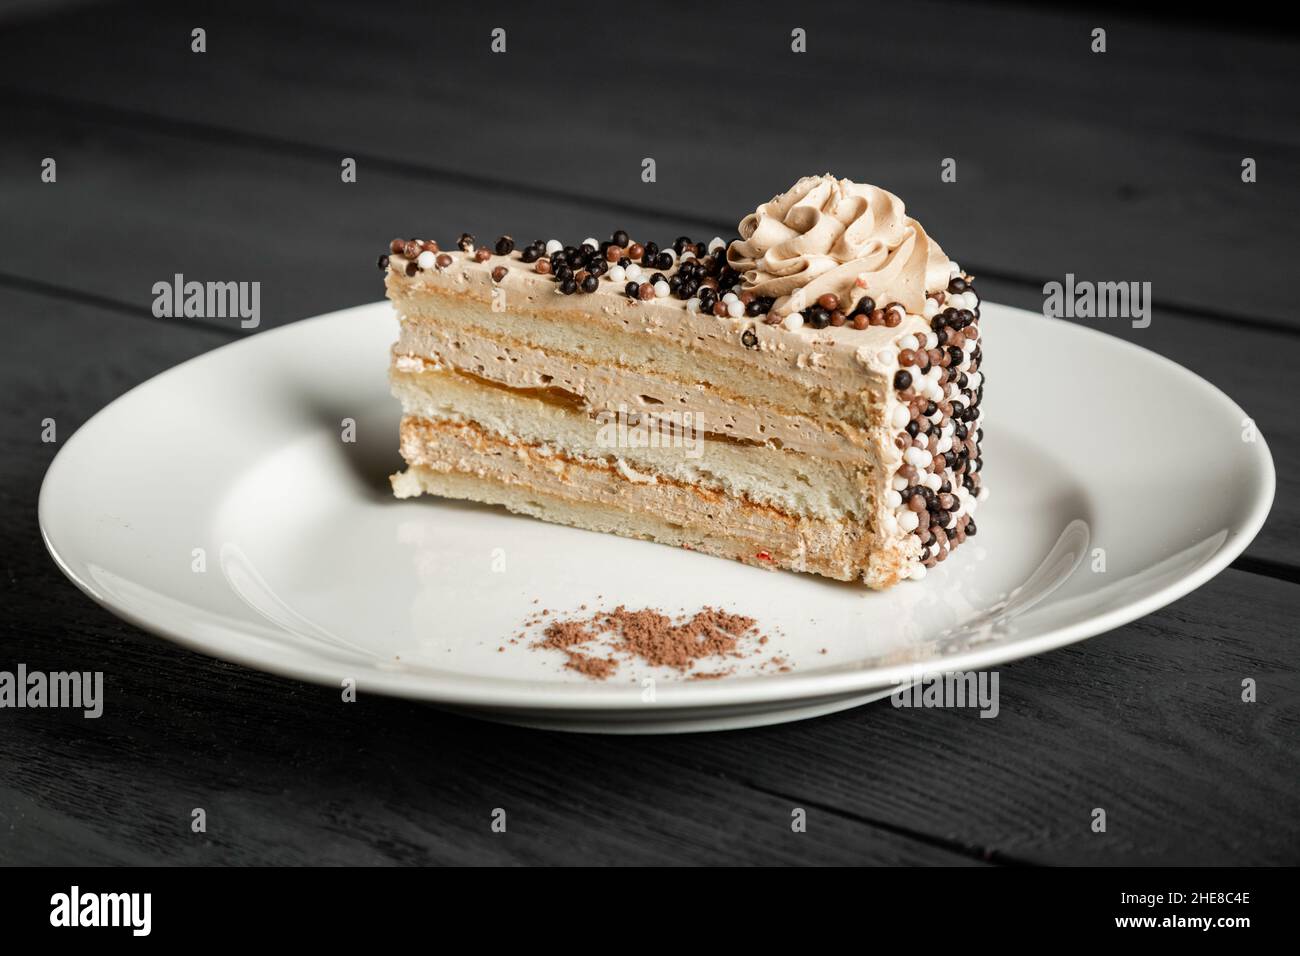 Piece of delicious cake with a flower, sweet balls and cream on a white plate. Stock Photo